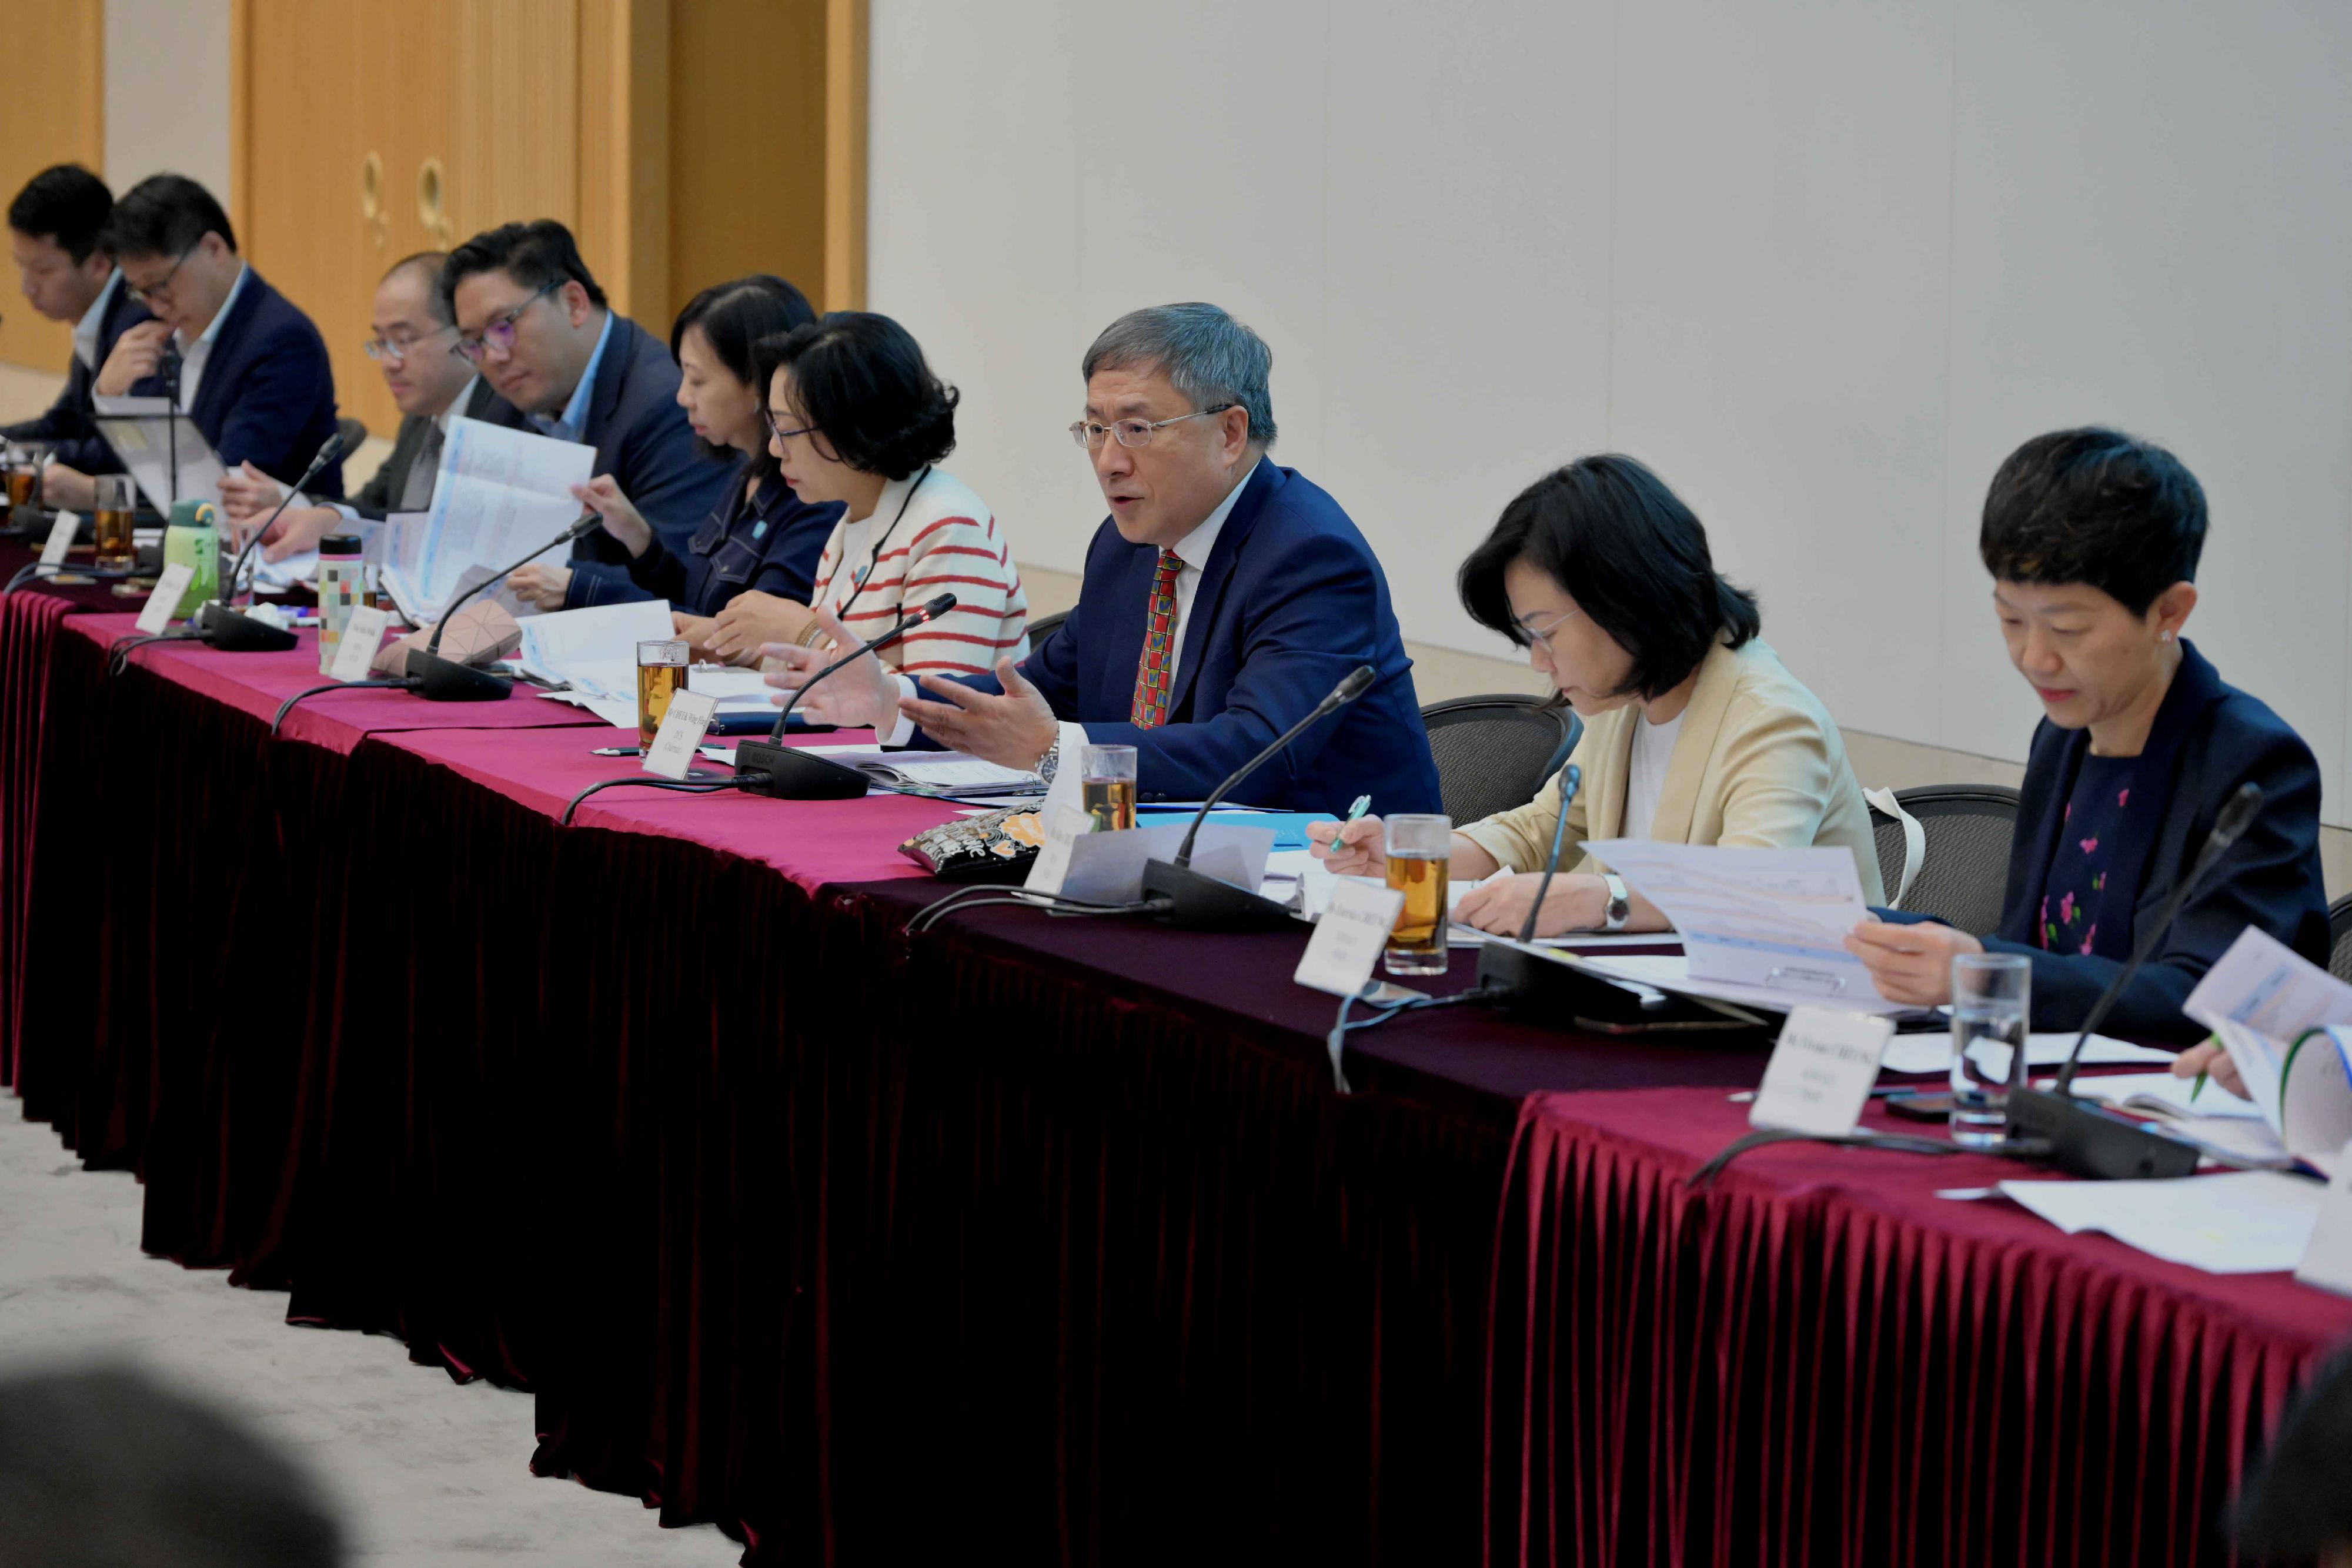 The Deputy Chief Secretary for Administration, Mr Cheuk Wing-hing (third right), chairs the fourth meeting of the Task Force on District Governance today (April 29) to review the preparatory work of various bureaux and departments for the celebration of the 75th anniversary of the founding of the People's Republic of China, and the implementation progress of seven district issues. Next to Mr Cheuk is the Secretary for Home and Youth Affairs, Miss Alice Mak (fourth right).